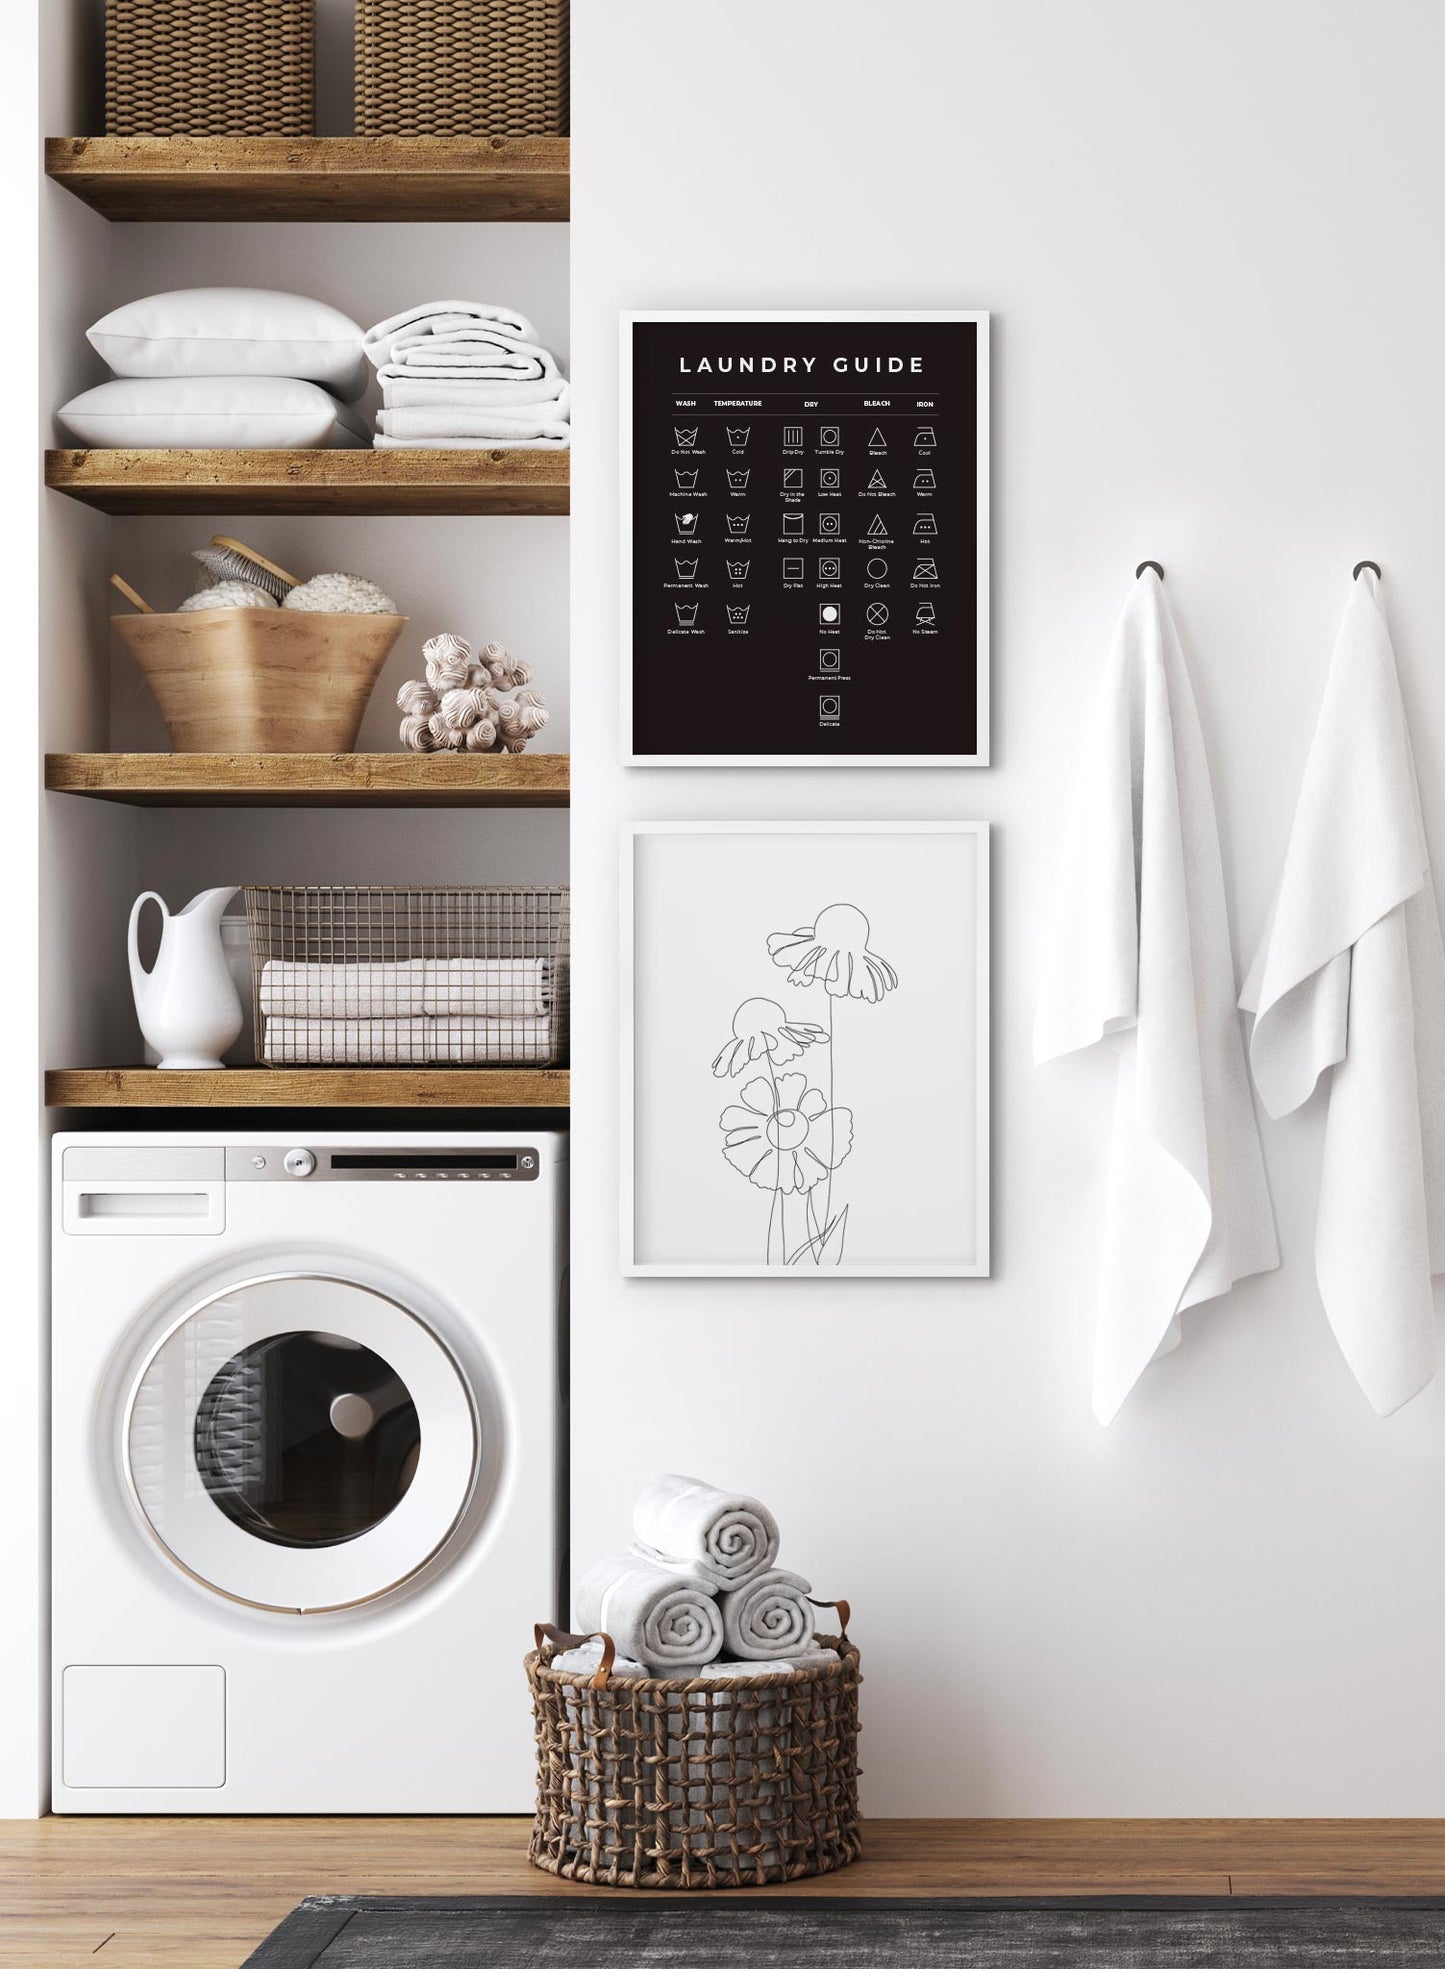 Laundry Guide in Black is a minimalist typography by Opposite Wall of a chart of laundry symbols and their meaning.